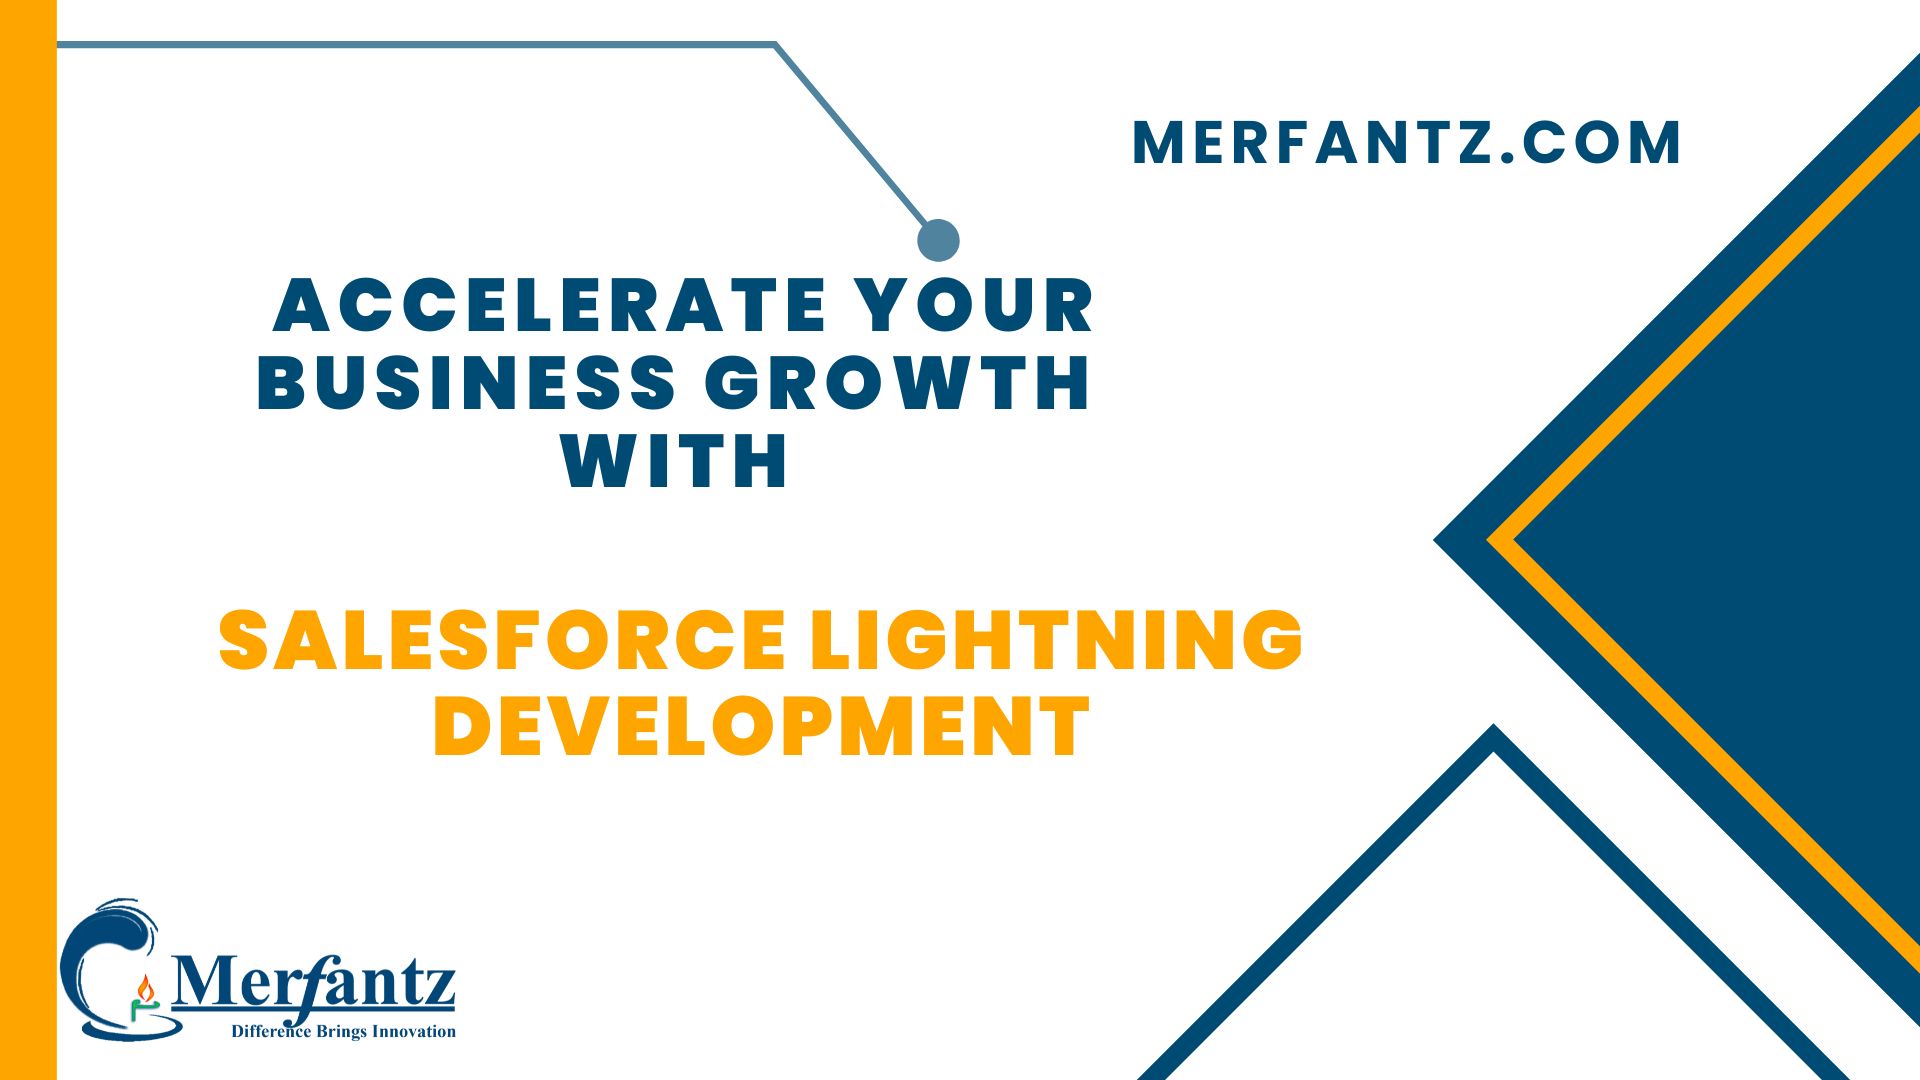 Accelerate Your Business Growth with Salesforce Lightning Development